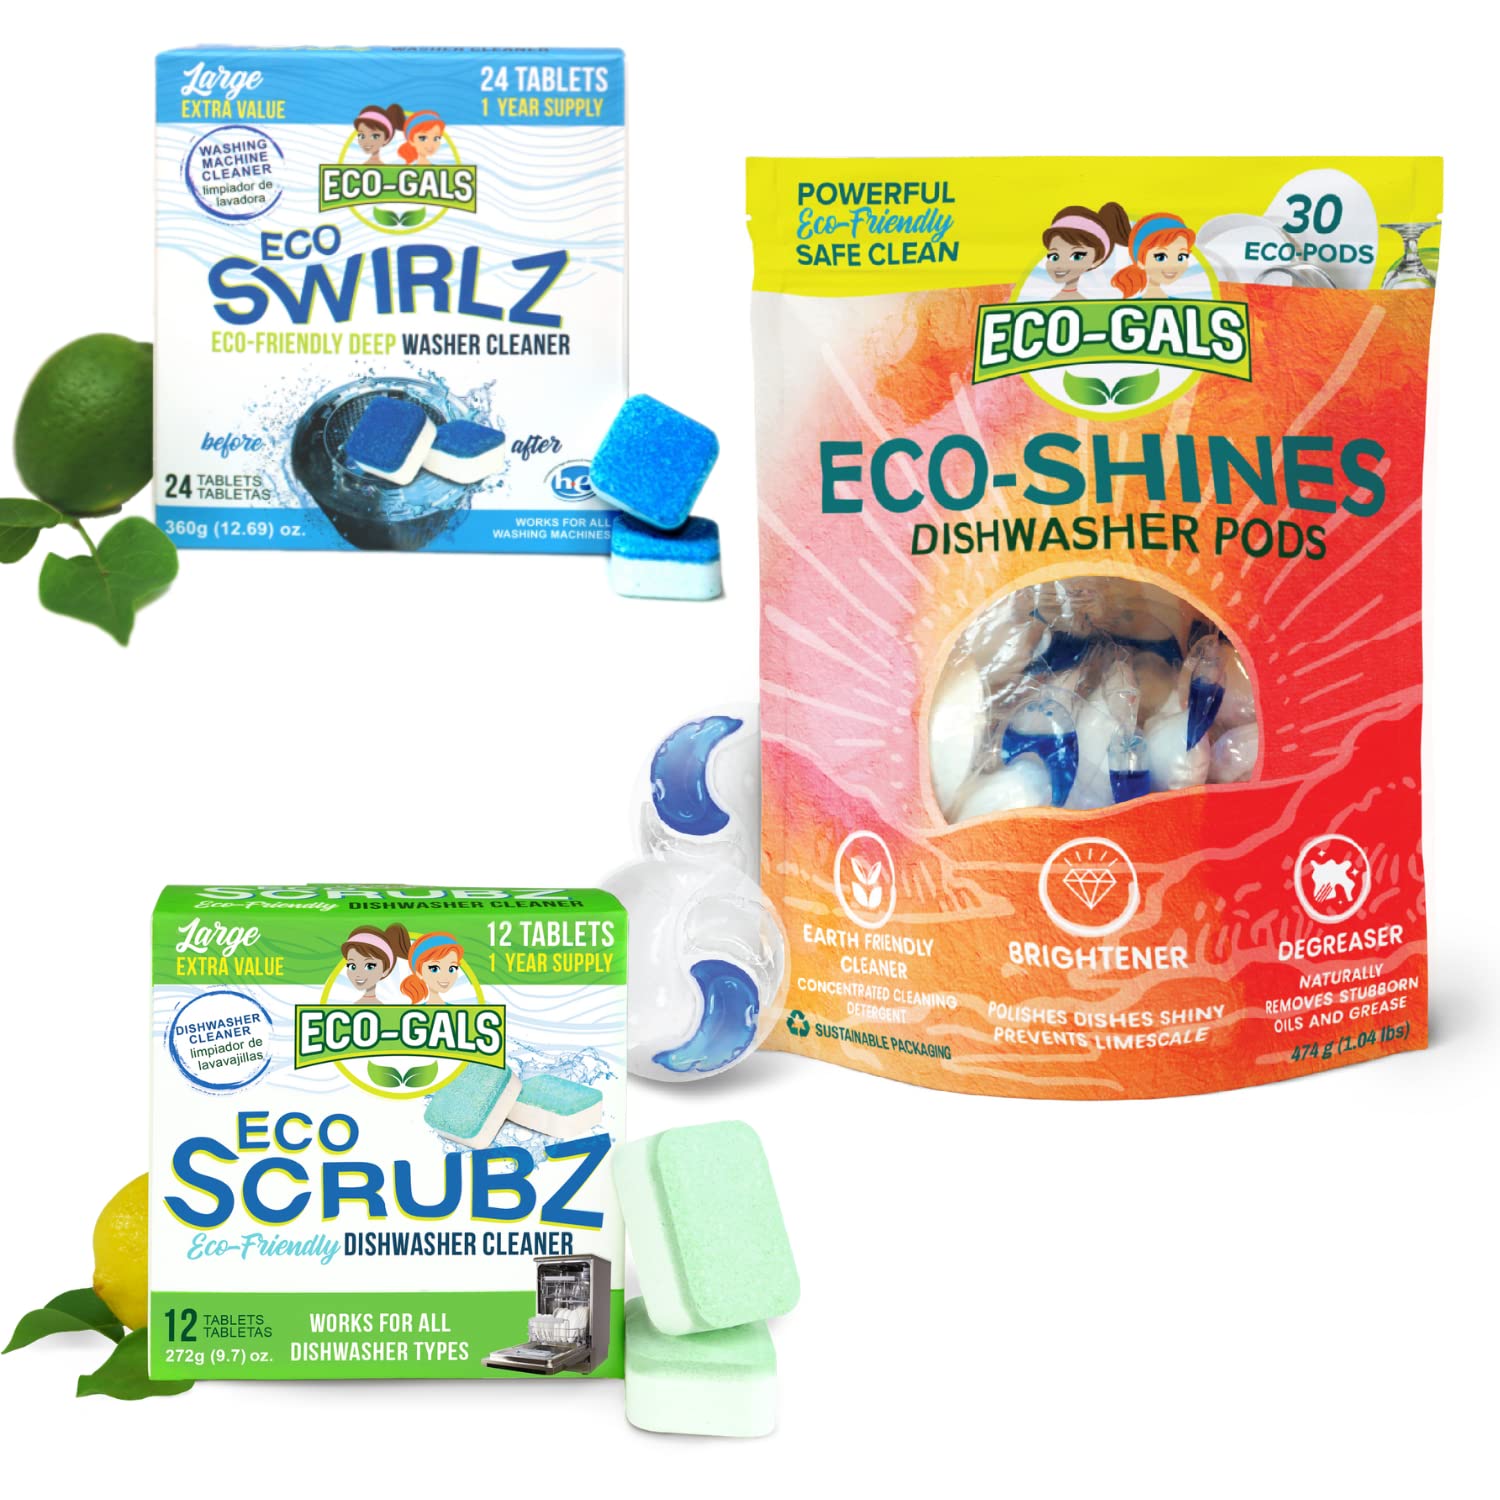 Eco-Gals Eco Scrubz Deep Dishwasher Machine Cleaner Unscented, 12 Count Tablets - 1 Year Supply plus Eco-Shines Dishwasher Detergent Pods With 3 in 1 Power of Liquid, Powder, and Gel for Brig